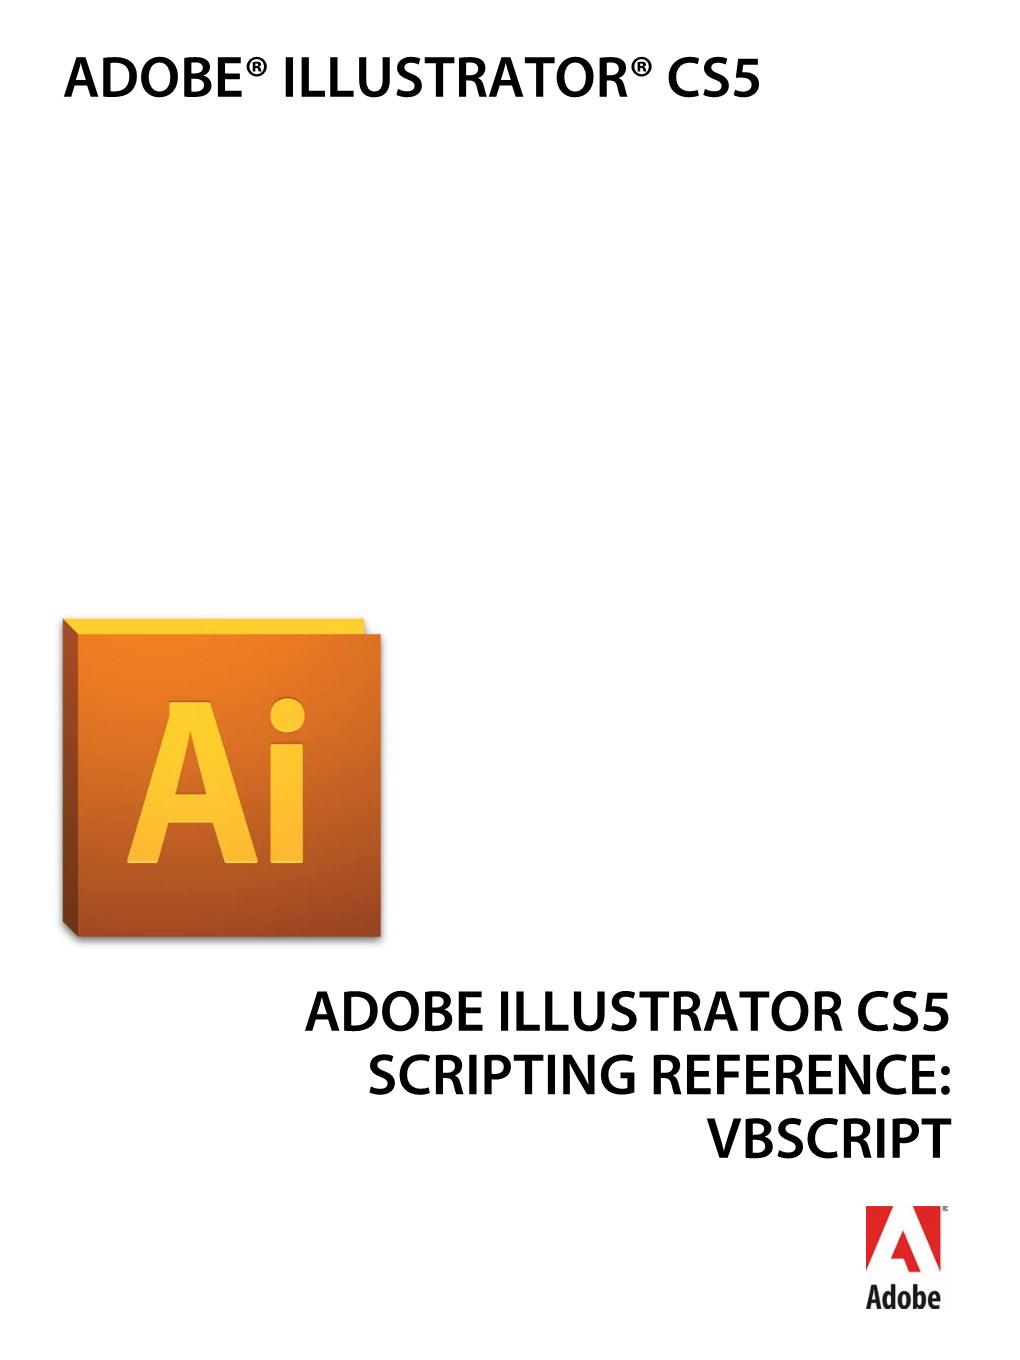 ADOBE ILLUSTRATOR CS5 SCRIPTING REFERENCE: VBSCRIPT © 2010 Adobe Systems Incorporated